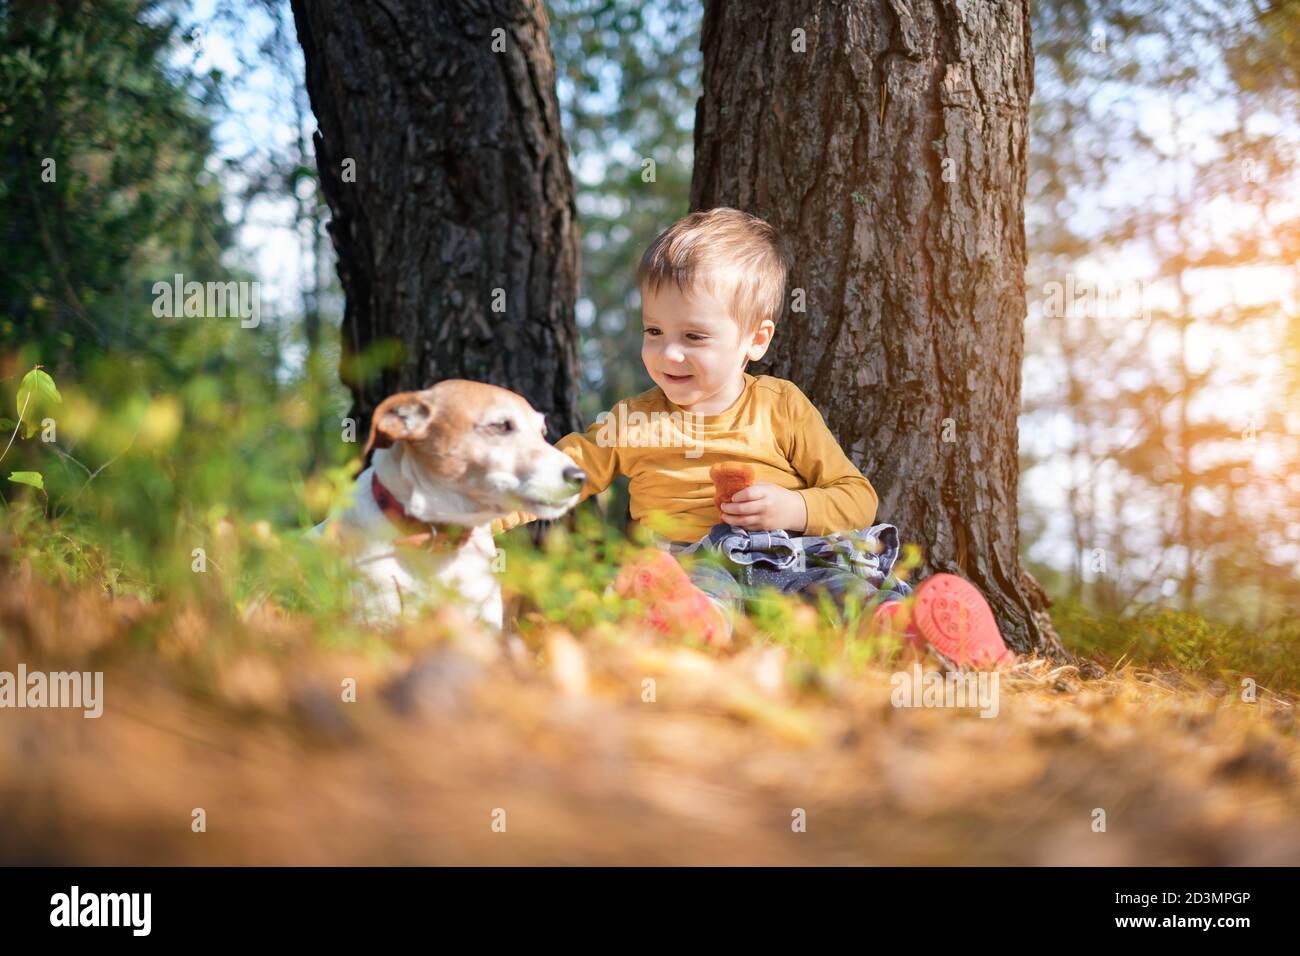 Jack Russel Terrier High Resolution Stock Photography and Images - Alamy